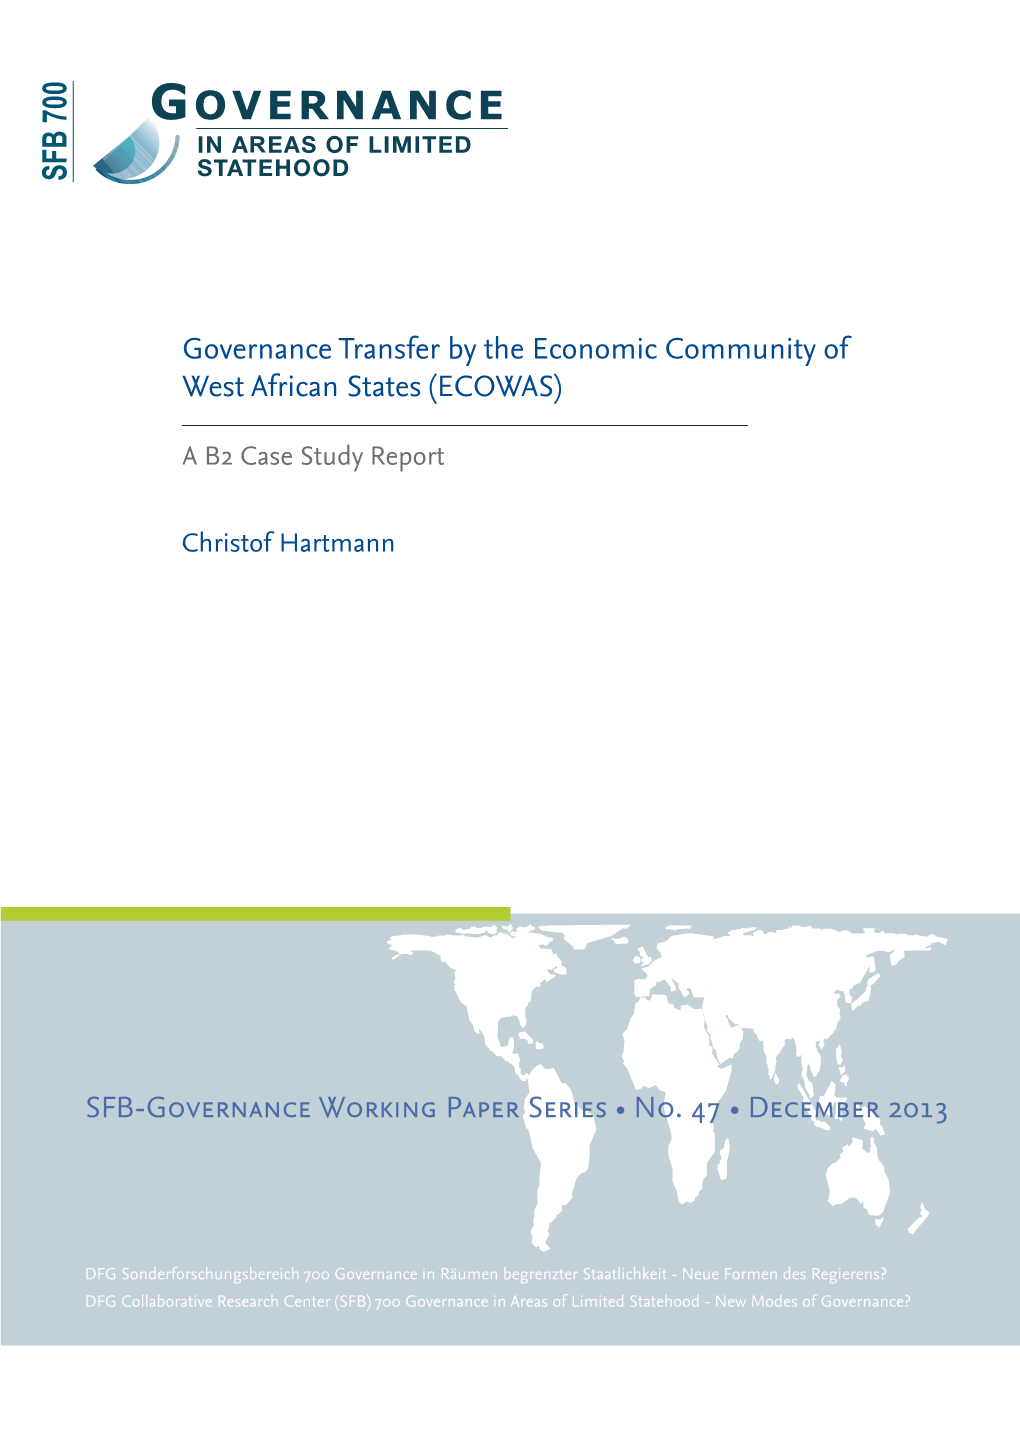 Governance Transfer by the Economic Community of West African States (ECOWAS)